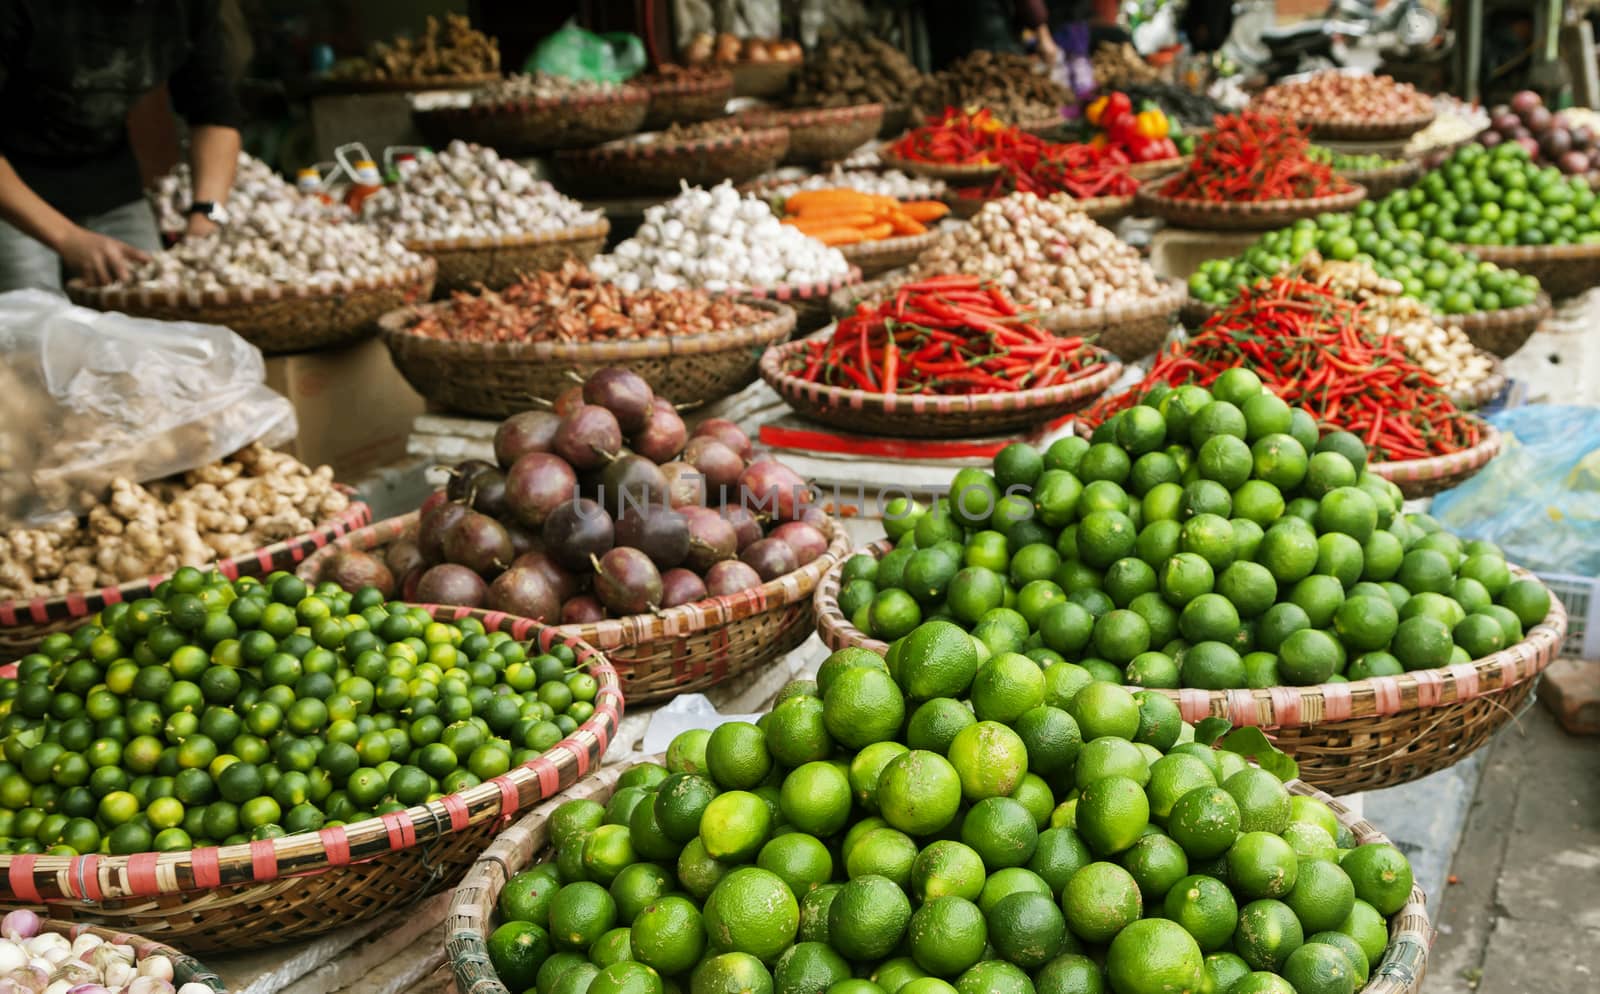 Fruits and spices at a market in Vietnam by Goodday